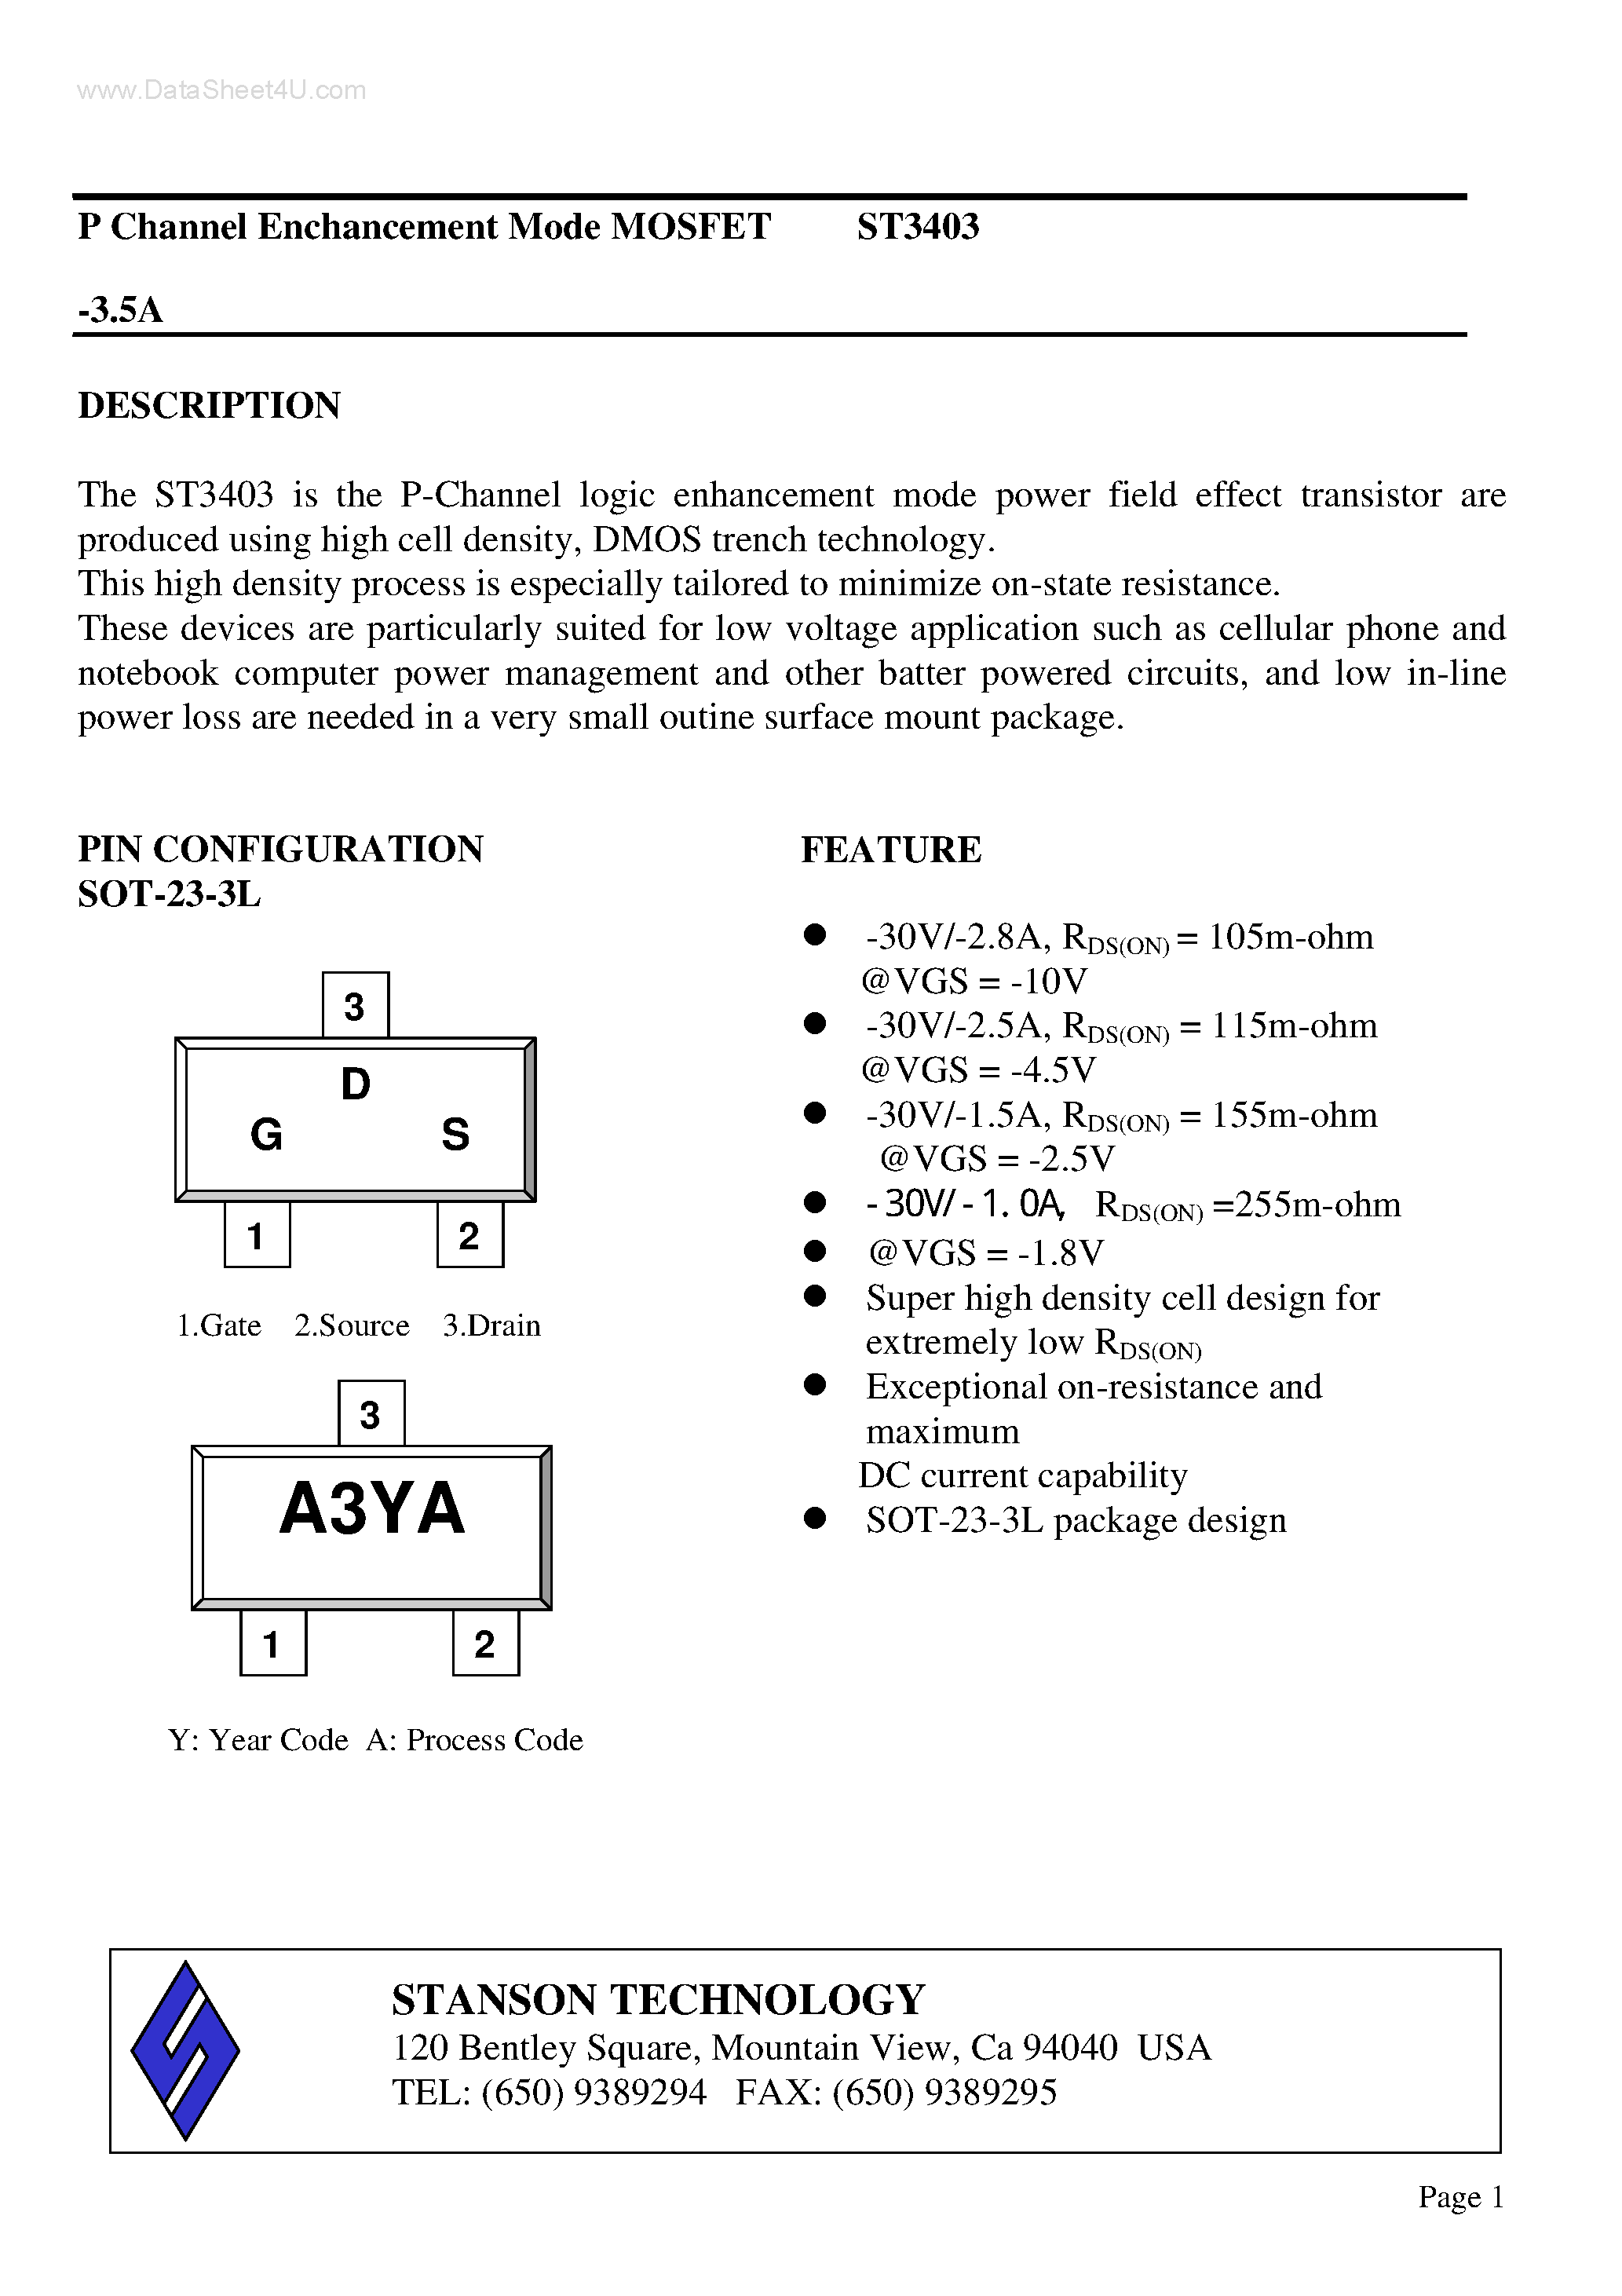 Datasheet ST3403 - P Channel Enchancement Mode MOSFET page 1